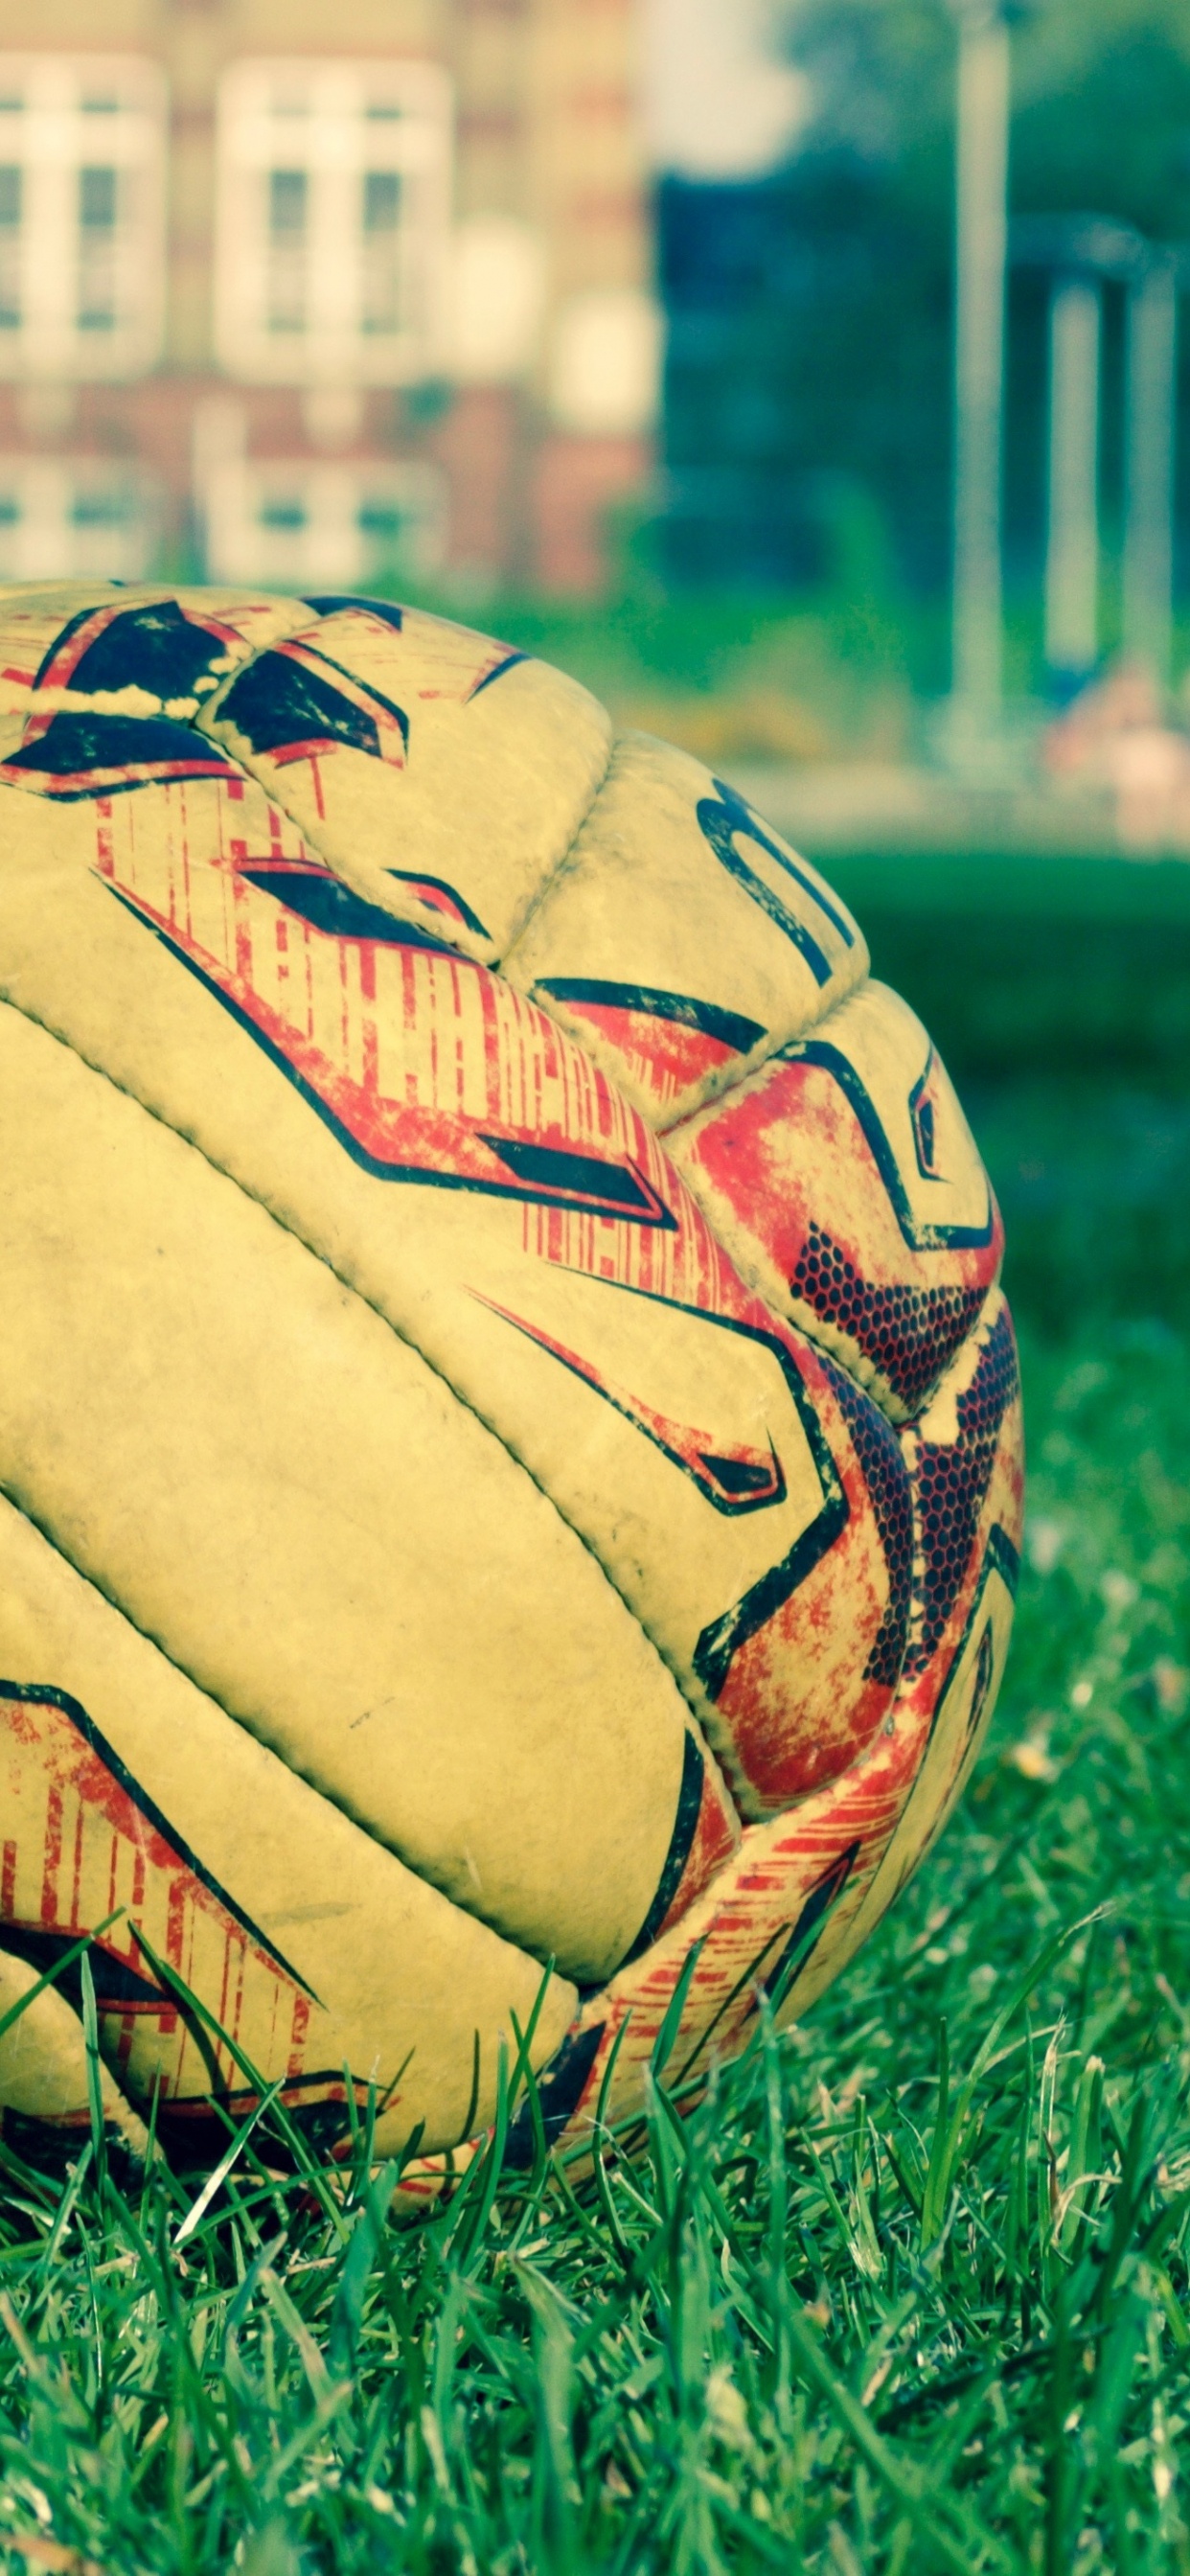 Brown and Black Soccer Ball on Green Grass Field During Daytime. Wallpaper in 1242x2688 Resolution